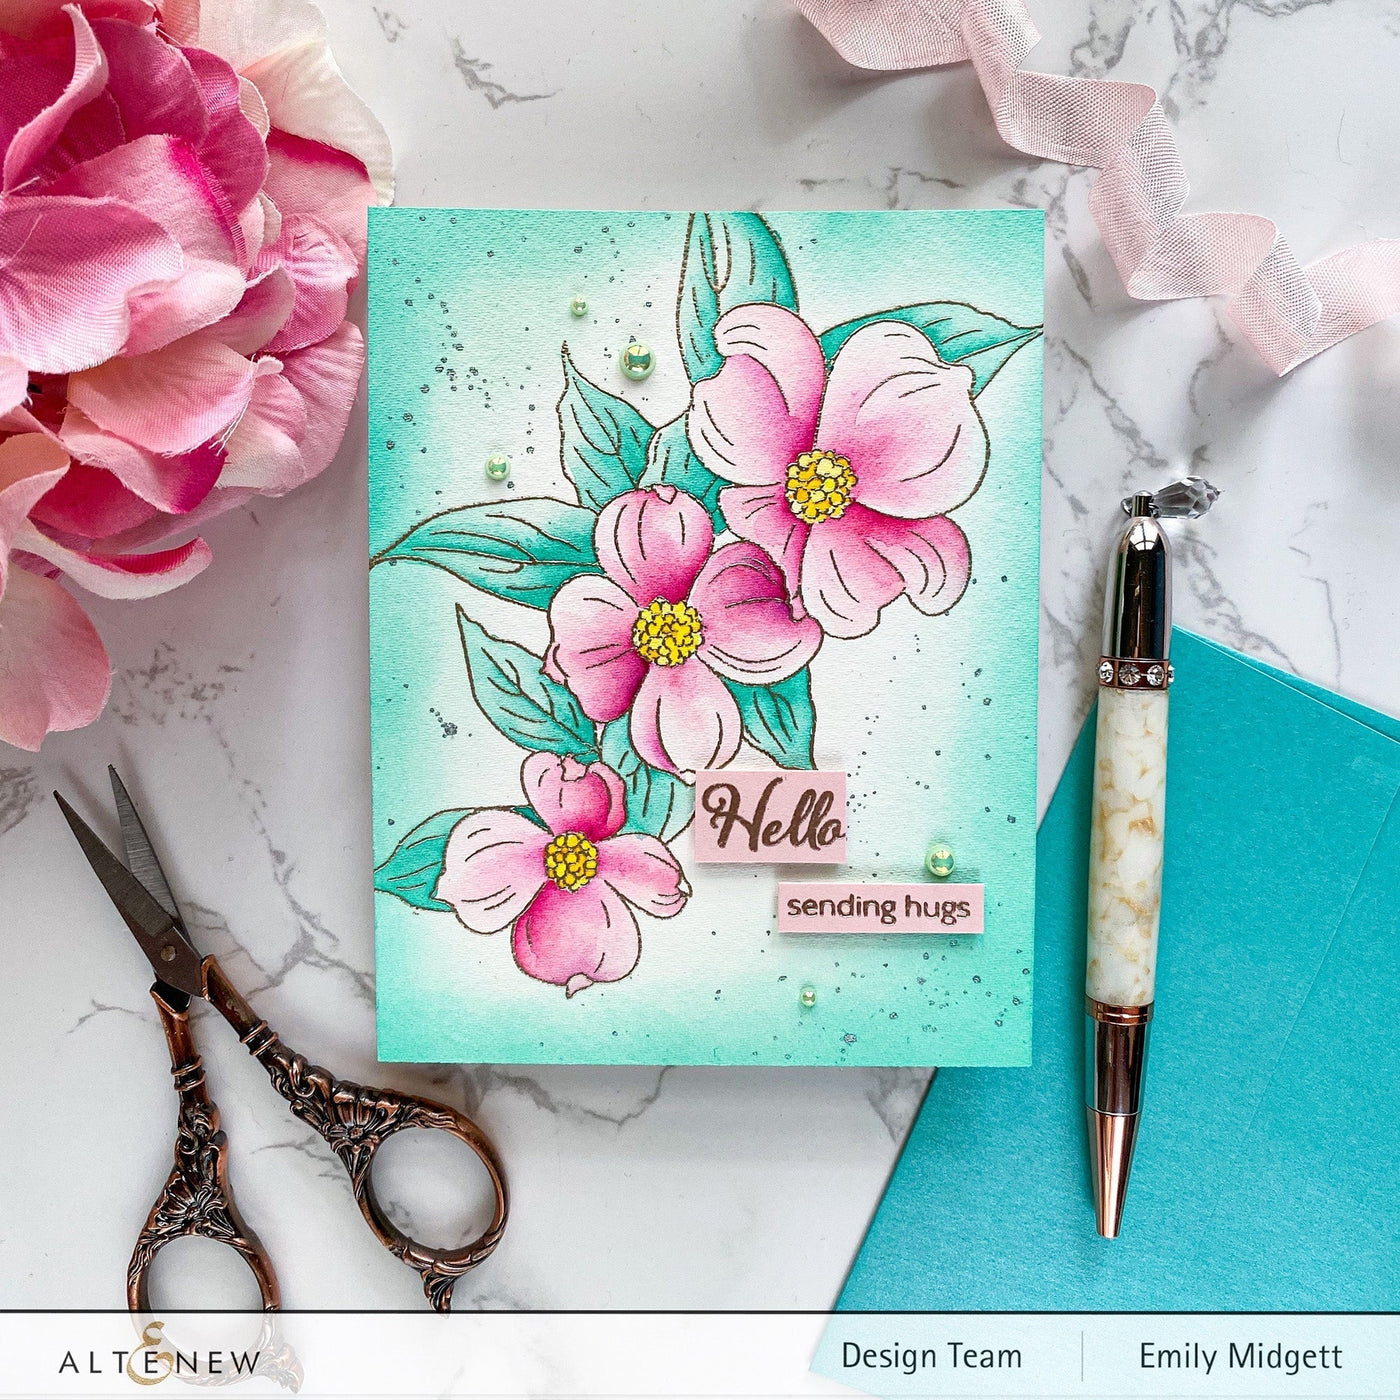 Clear Stamps Paint-A-Flower: Flowering Dogwood Outline Stamp Set